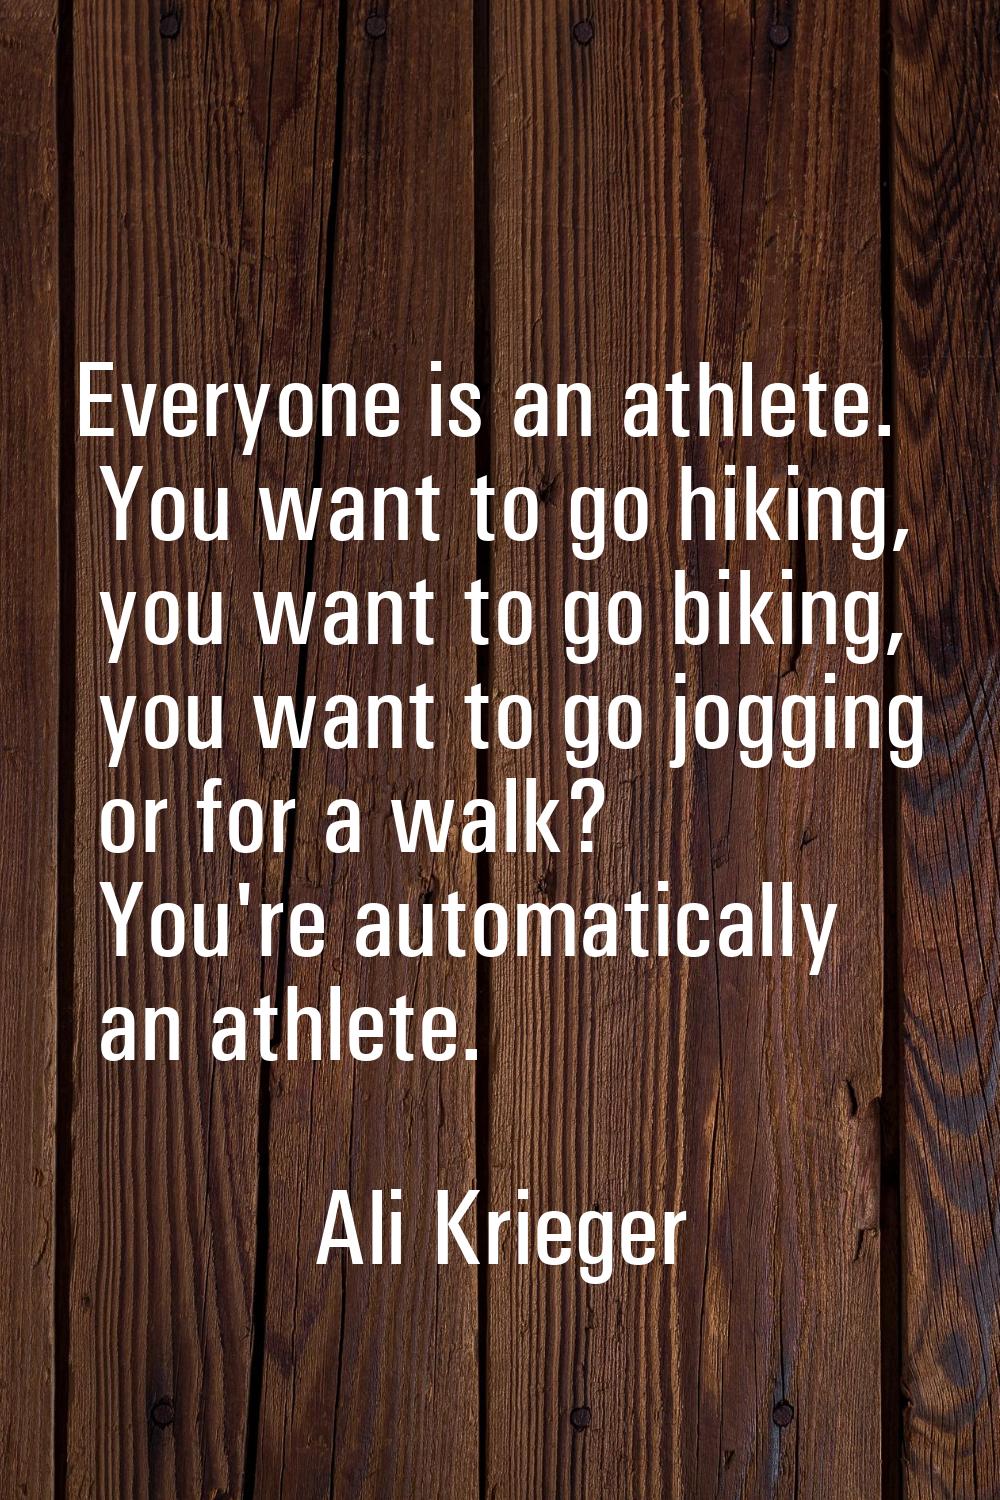 Everyone is an athlete. You want to go hiking, you want to go biking, you want to go jogging or for